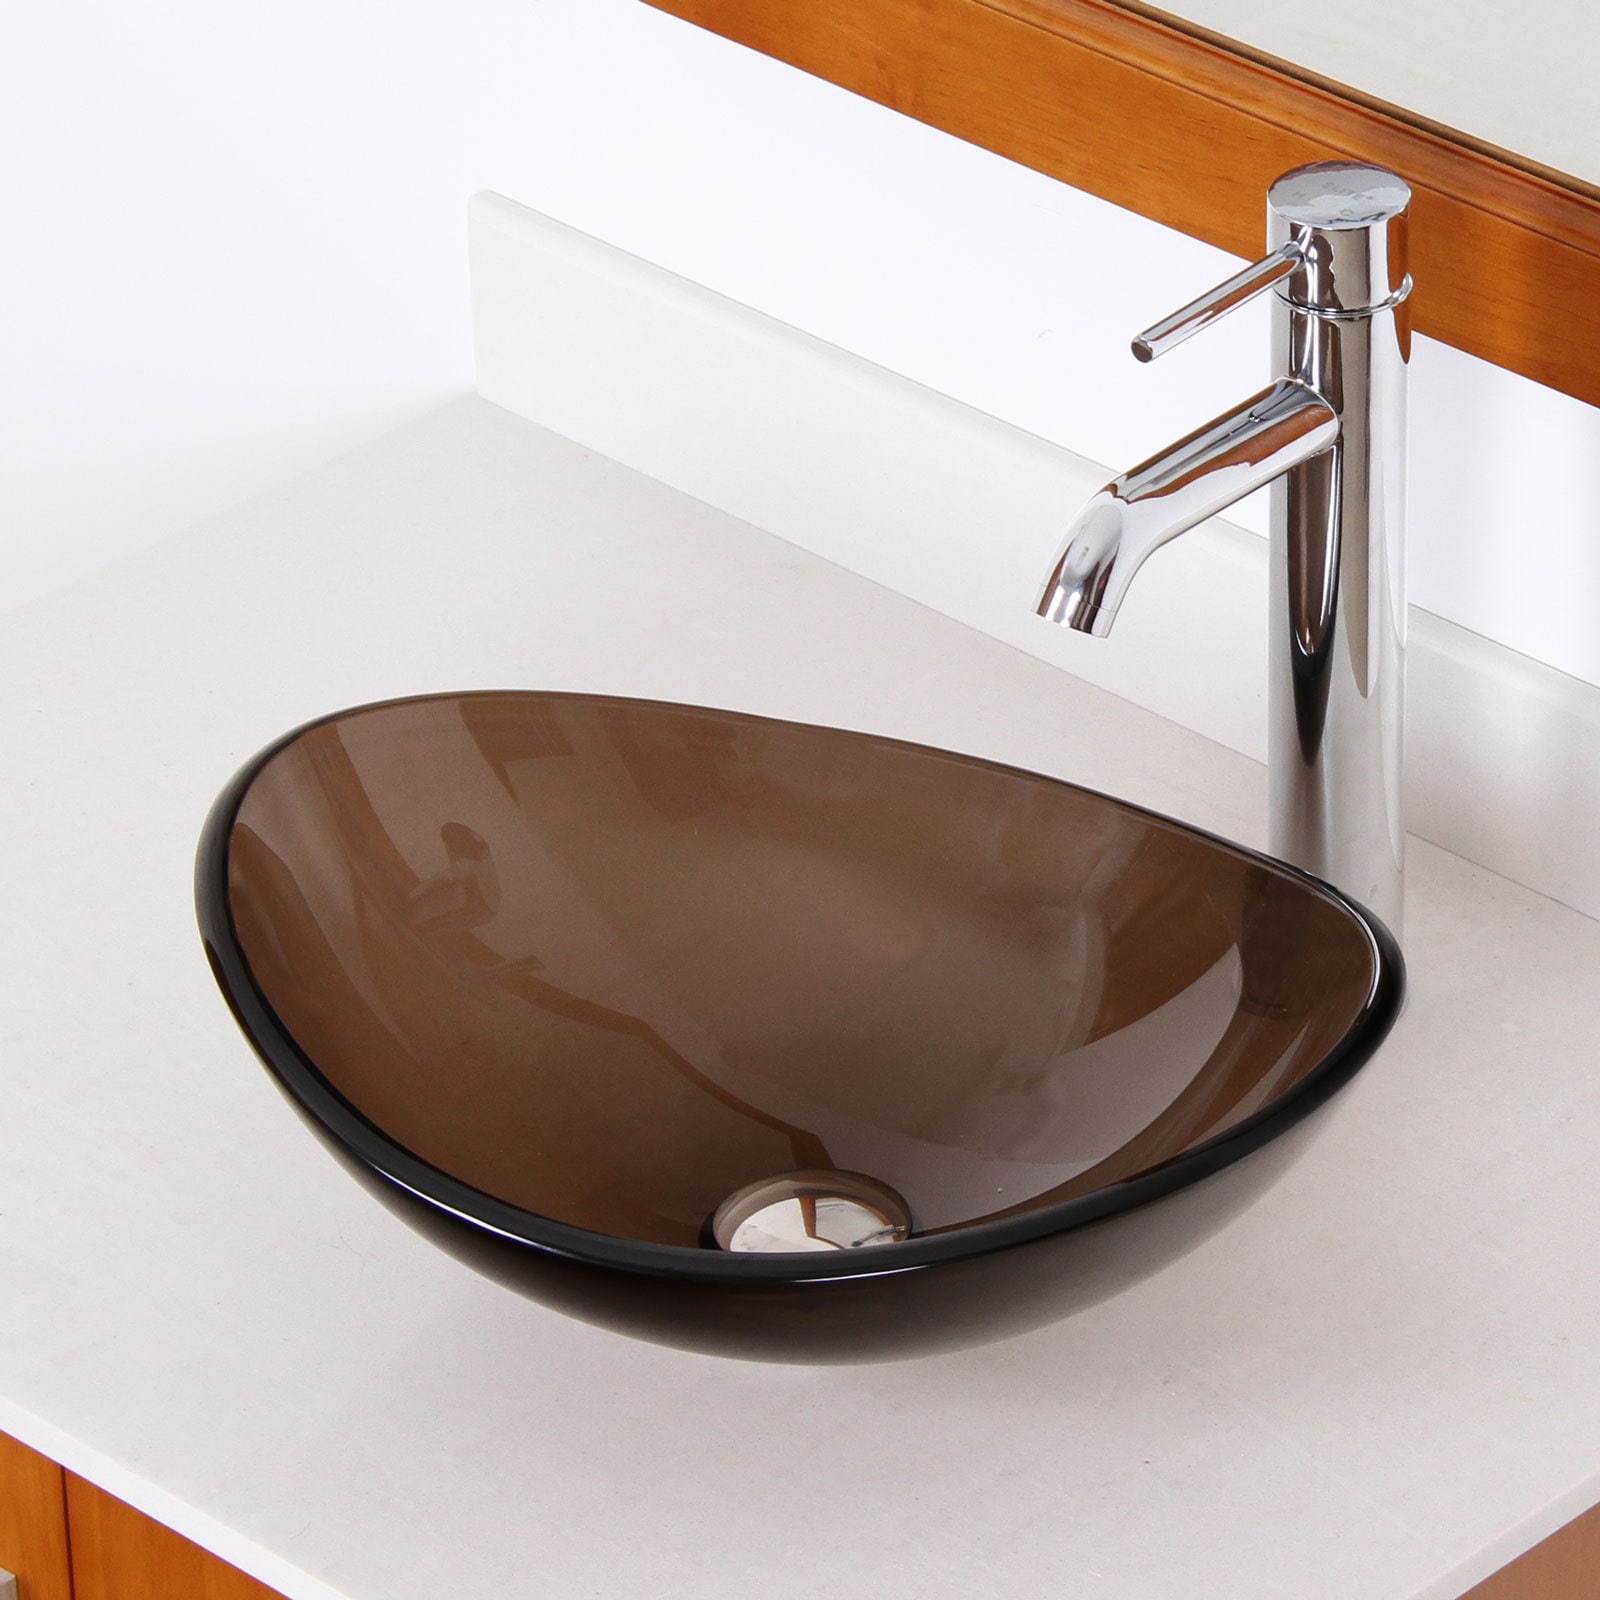 Elite 1417 F371023 Unique Oval Transparent Brown Tempered Glass Bathroom Vessel Sink With Faucet Combo